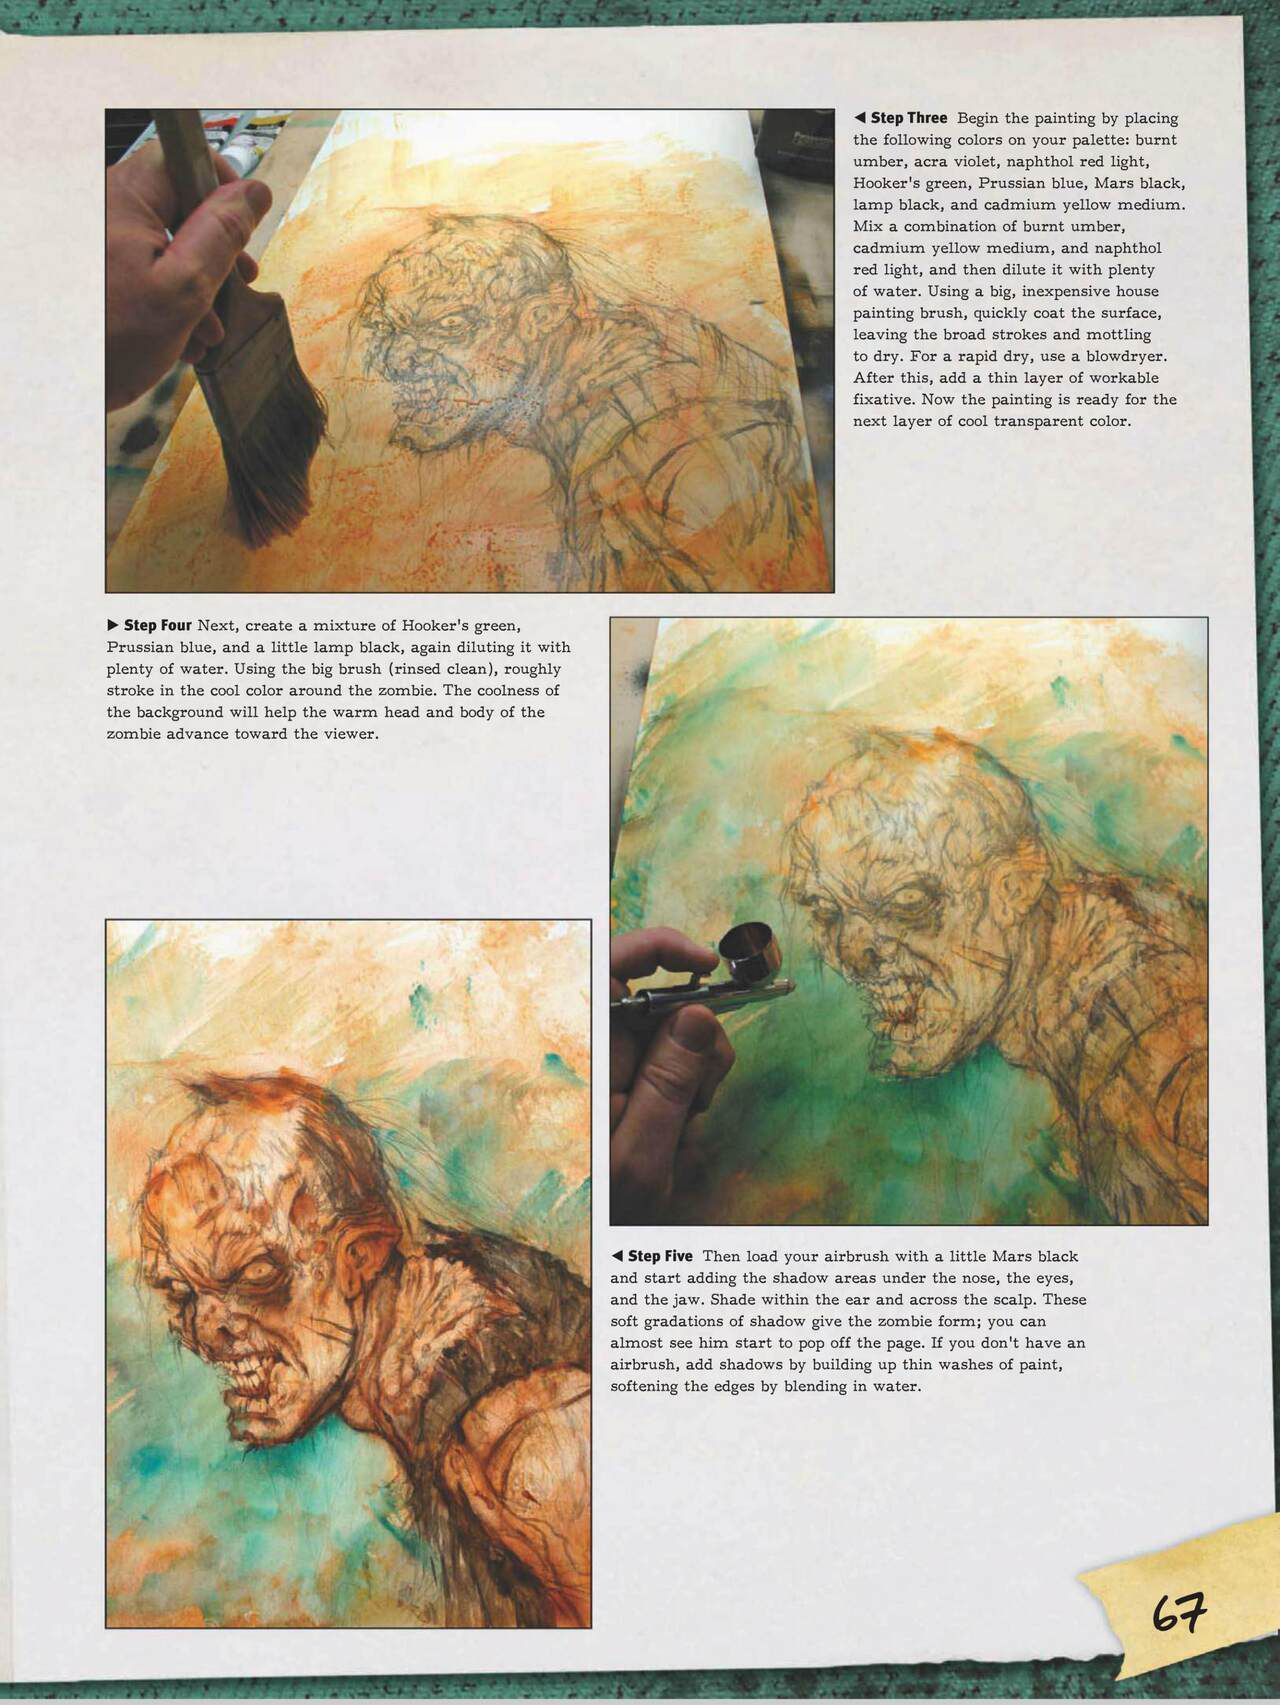 How to Draw Zombies: Discover the secrets to drawing, painting, and illustrating the undead 僵尸描绘集 68